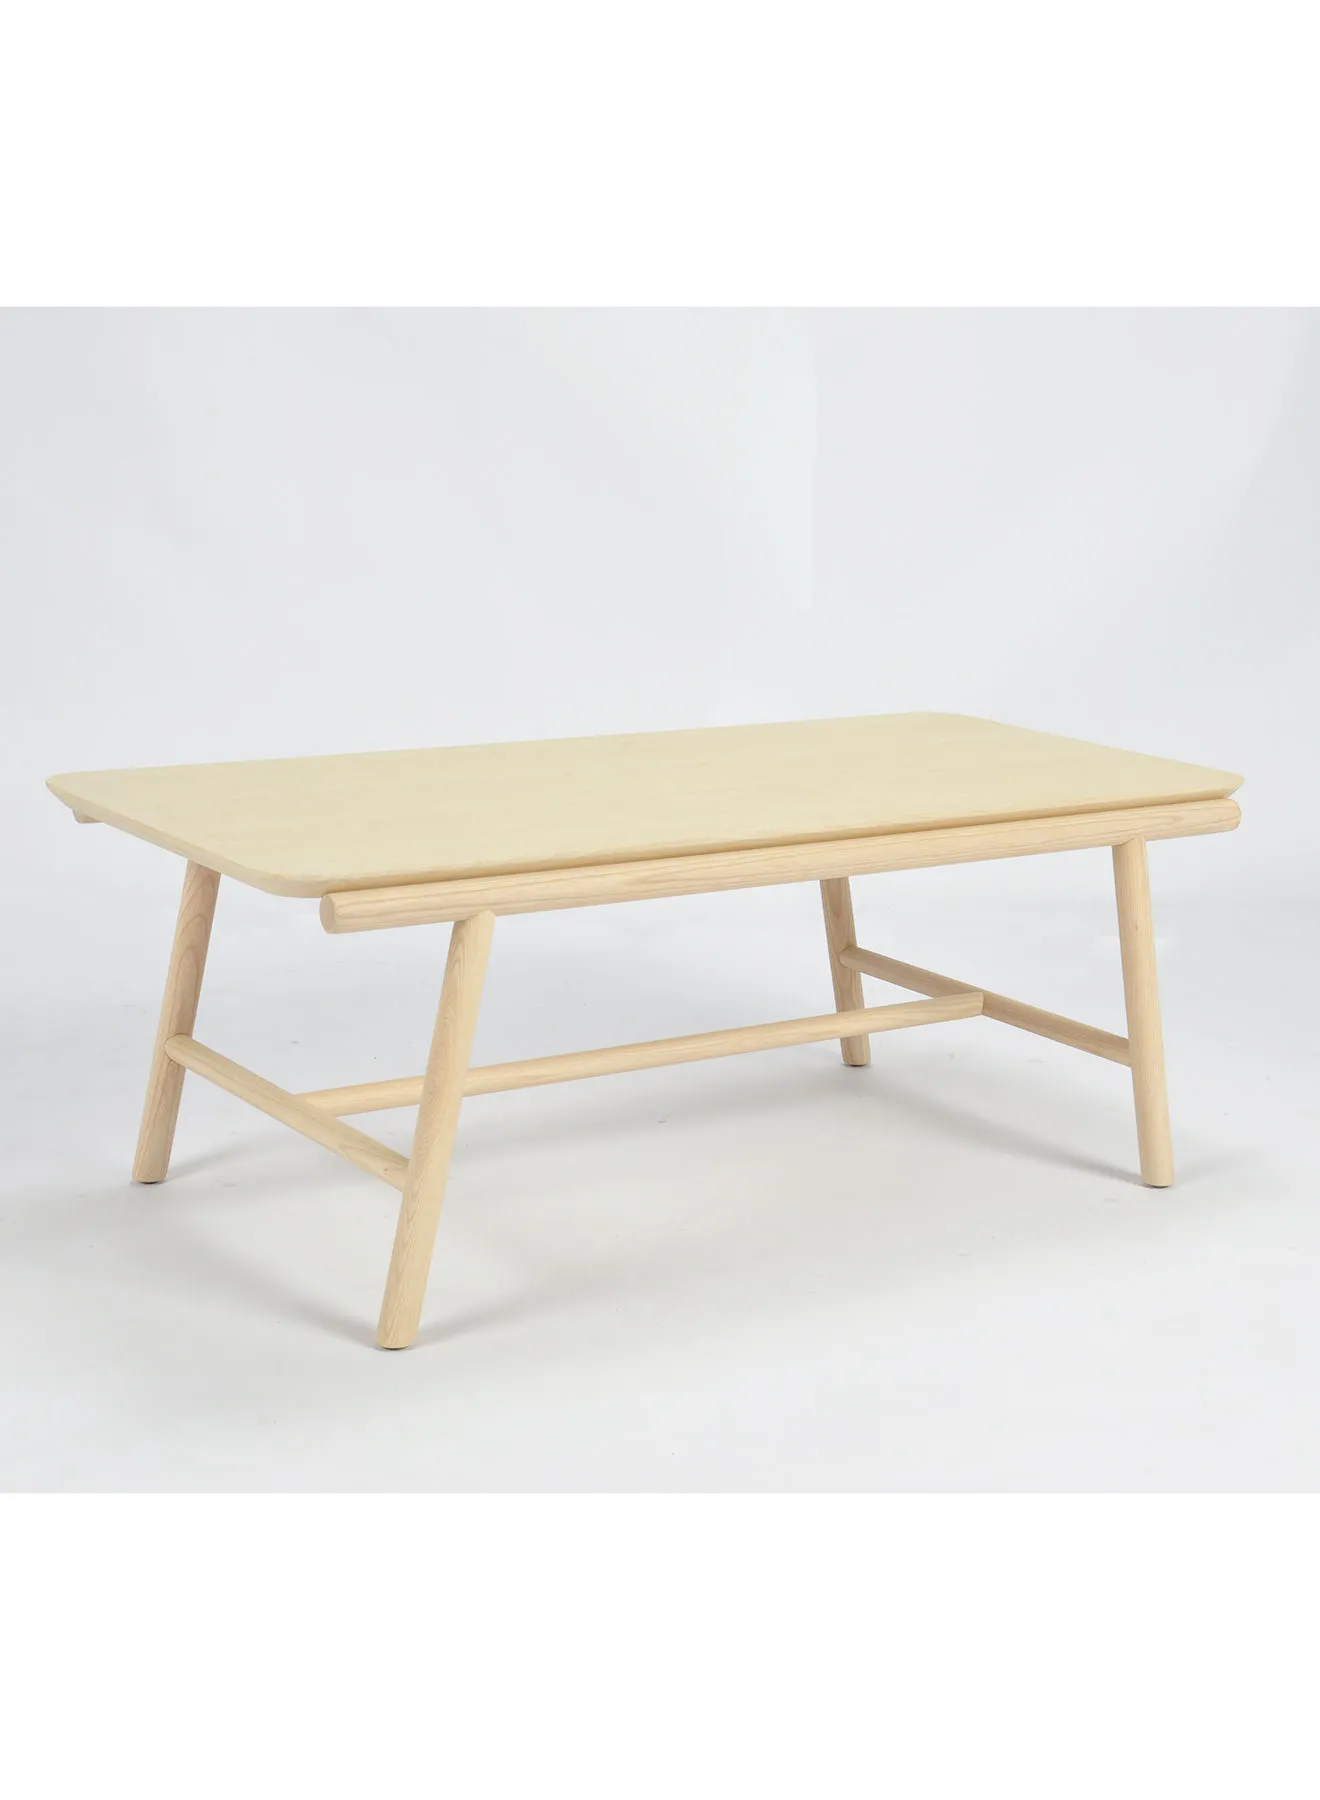 Switch Dining Table - Beige Modern Home 120 X 60 X 45 Rectangular